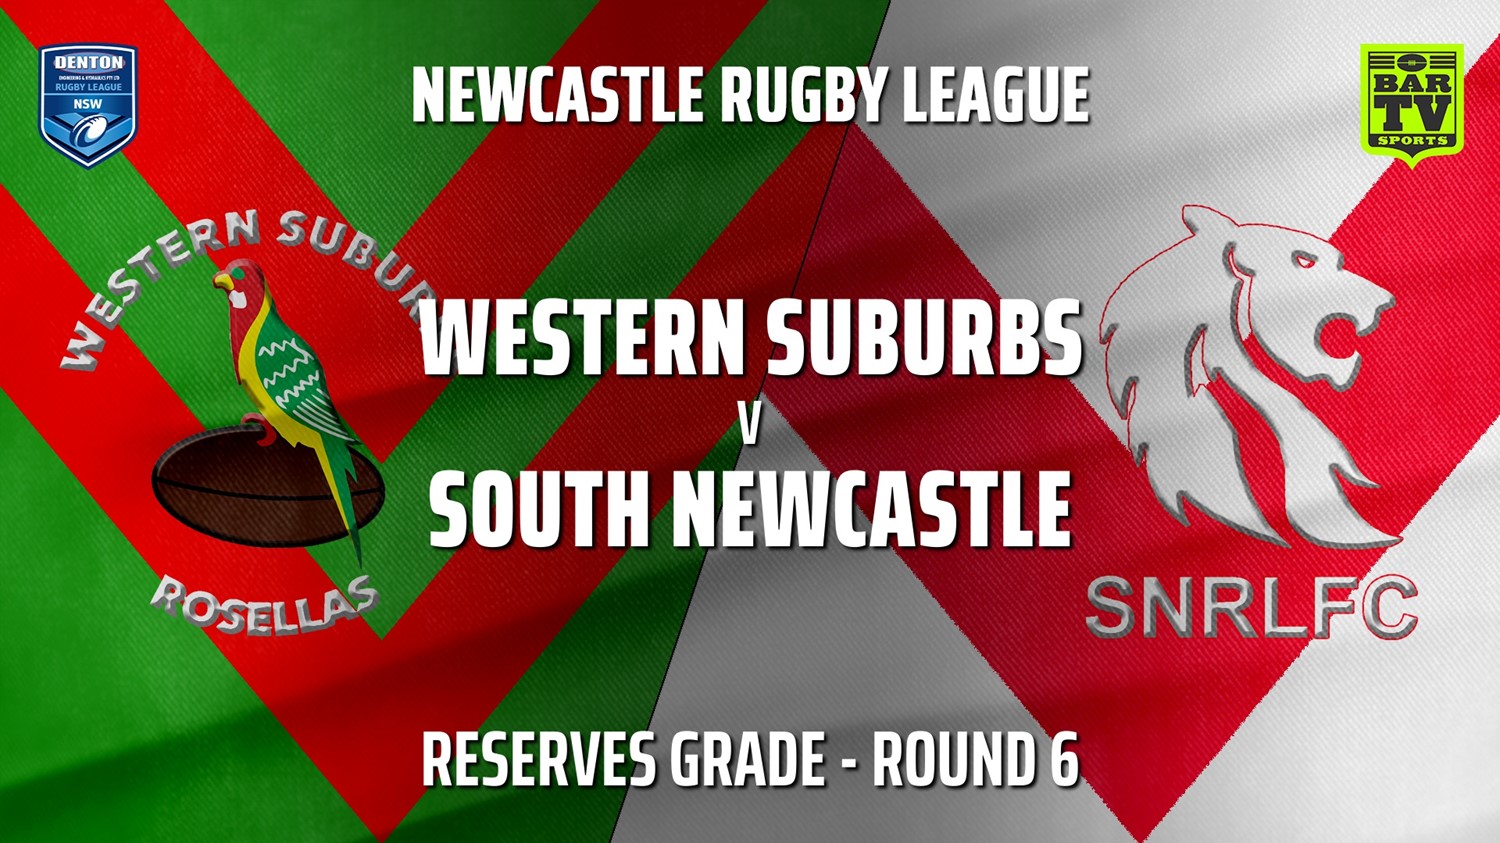 210502-Newcastle Rugby League Round 6 - Reserves Grade - Western Suburbs Rosellas v South Newcastle Minigame Slate Image